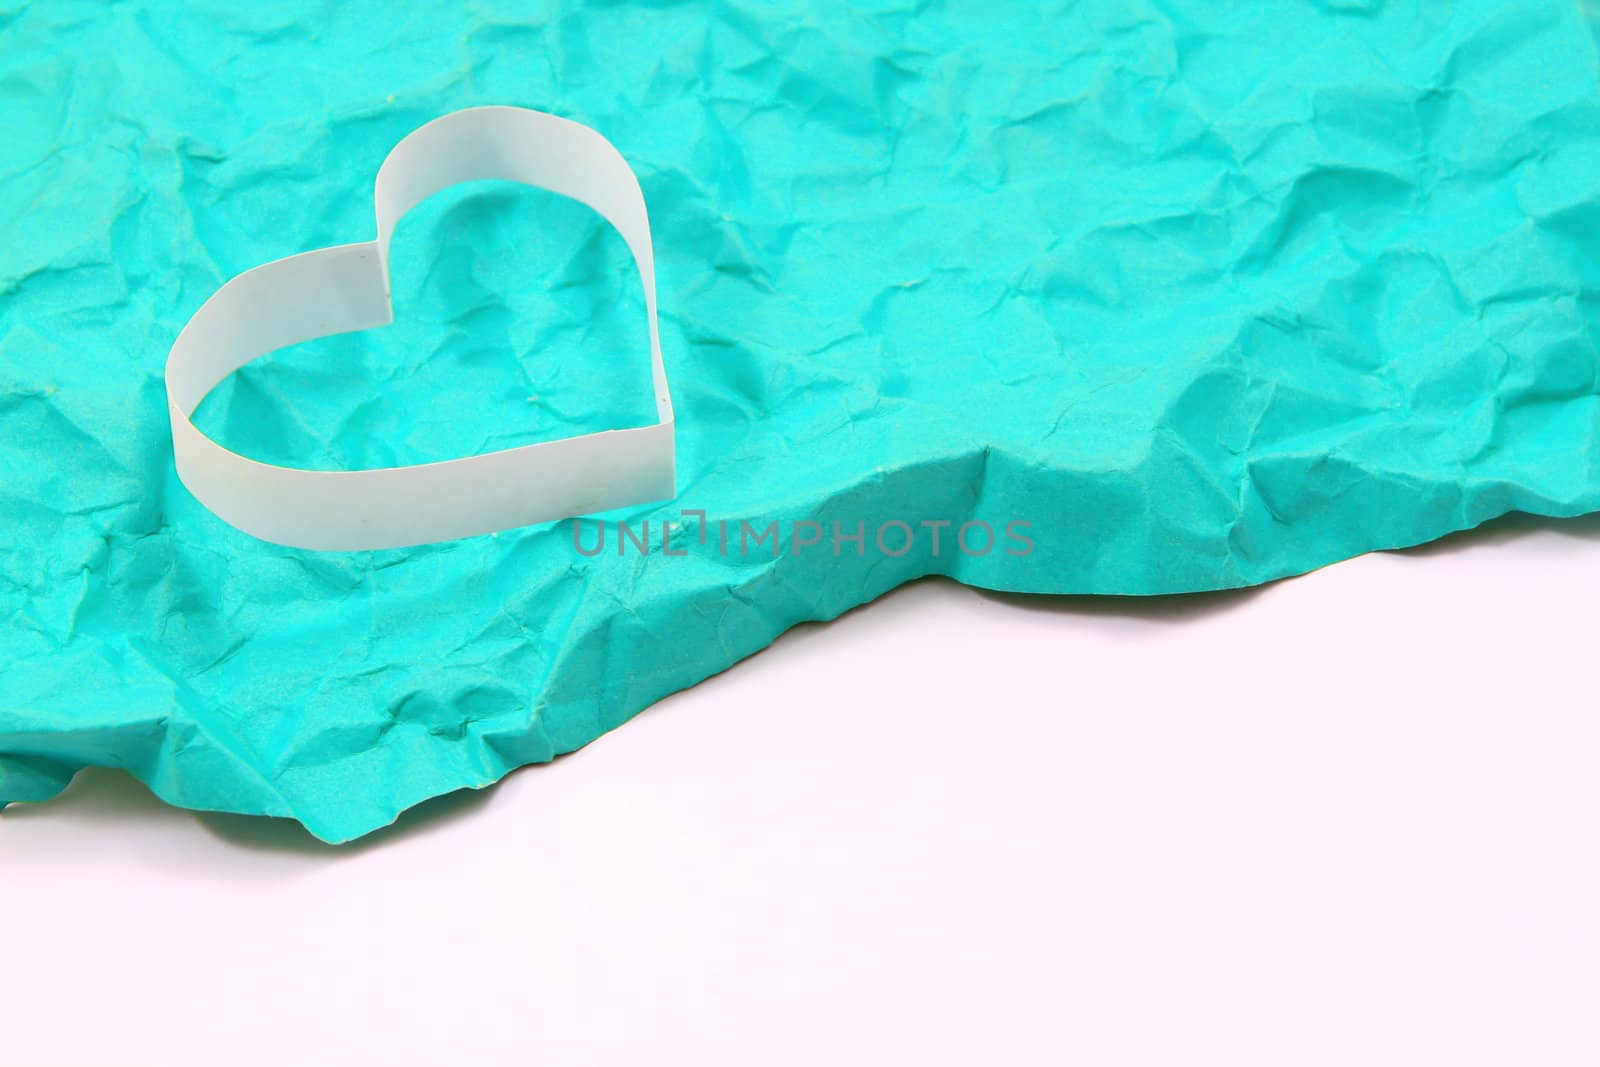 Paper hearts on green background